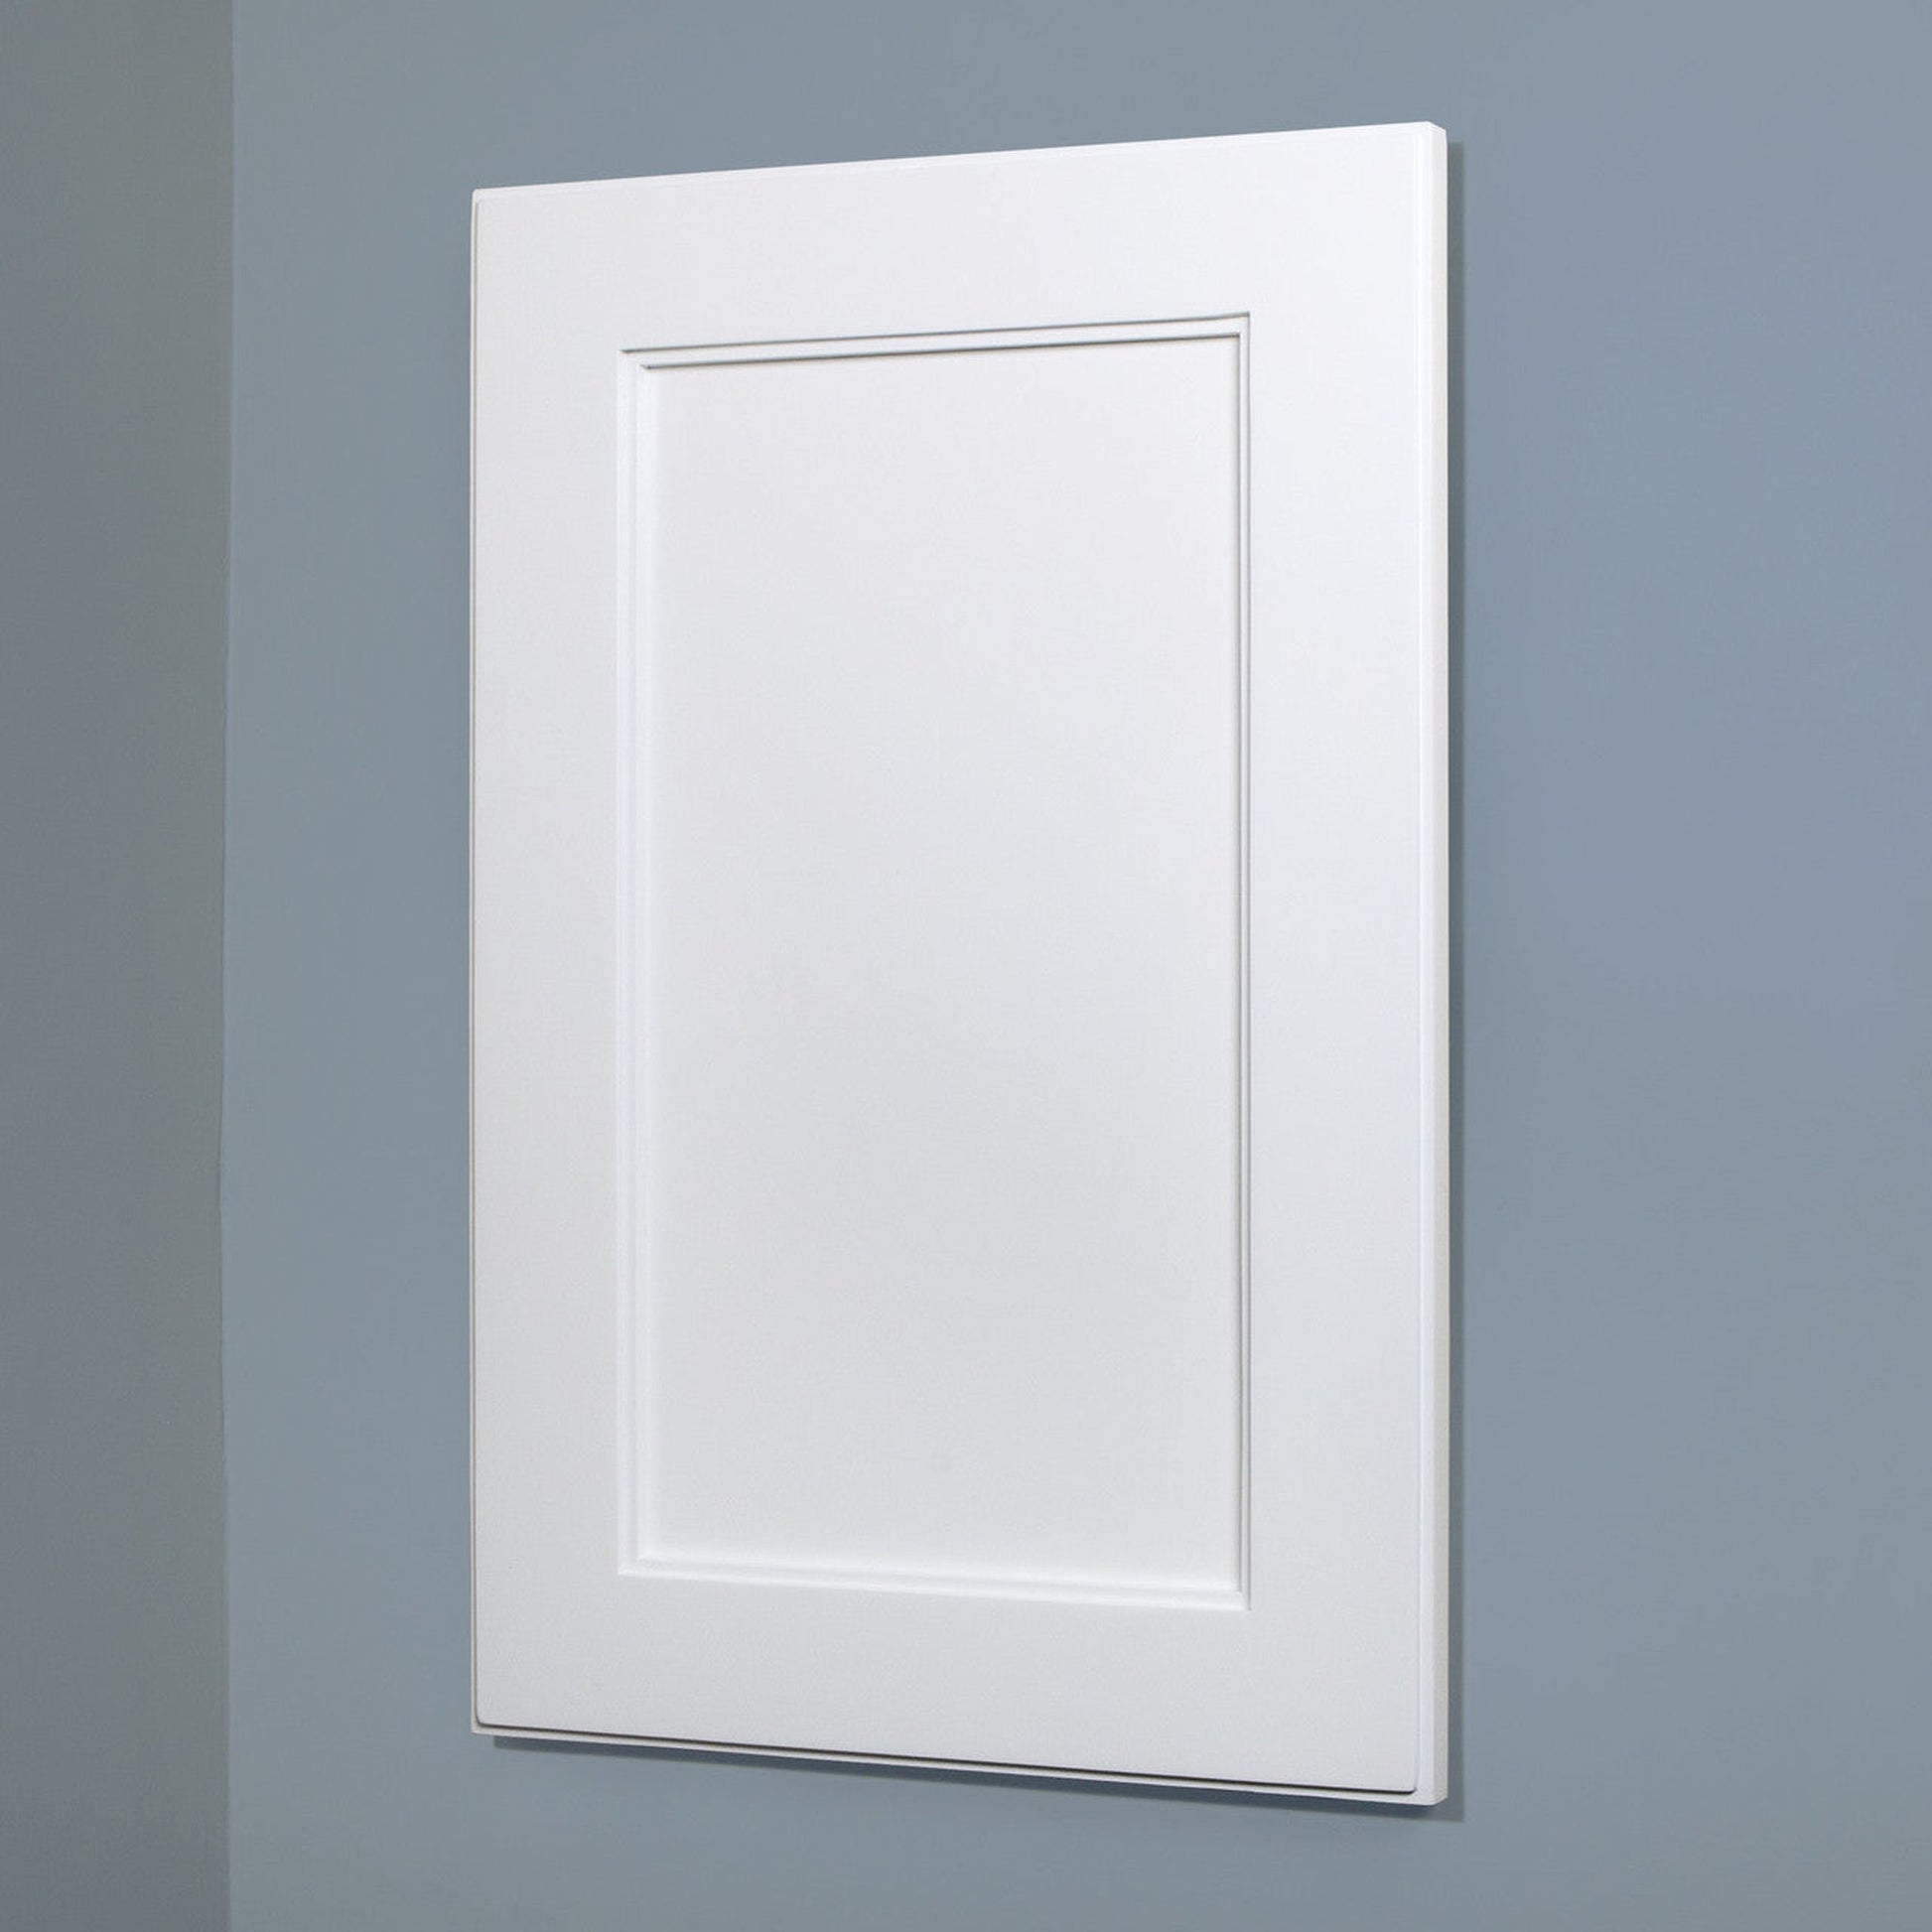 Fox Hollow Furnishings 101W5-CW 14" x 24" White Shaker Style White Interior Special 3" Depth Recessed Medicine Cabinet